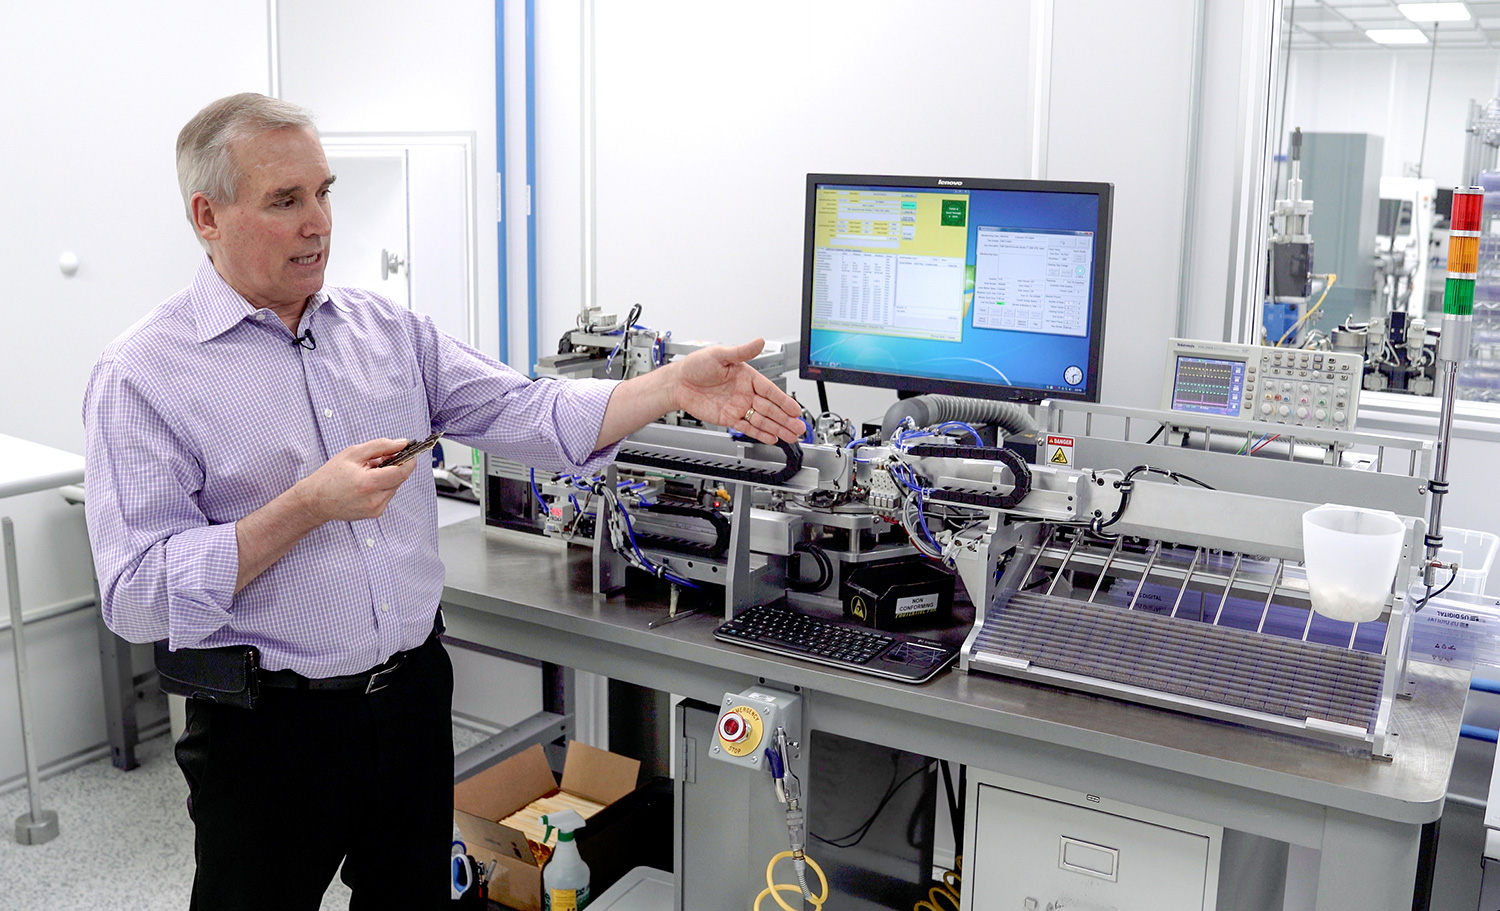 US Digital founder and CEO David Madore in front of automated machine